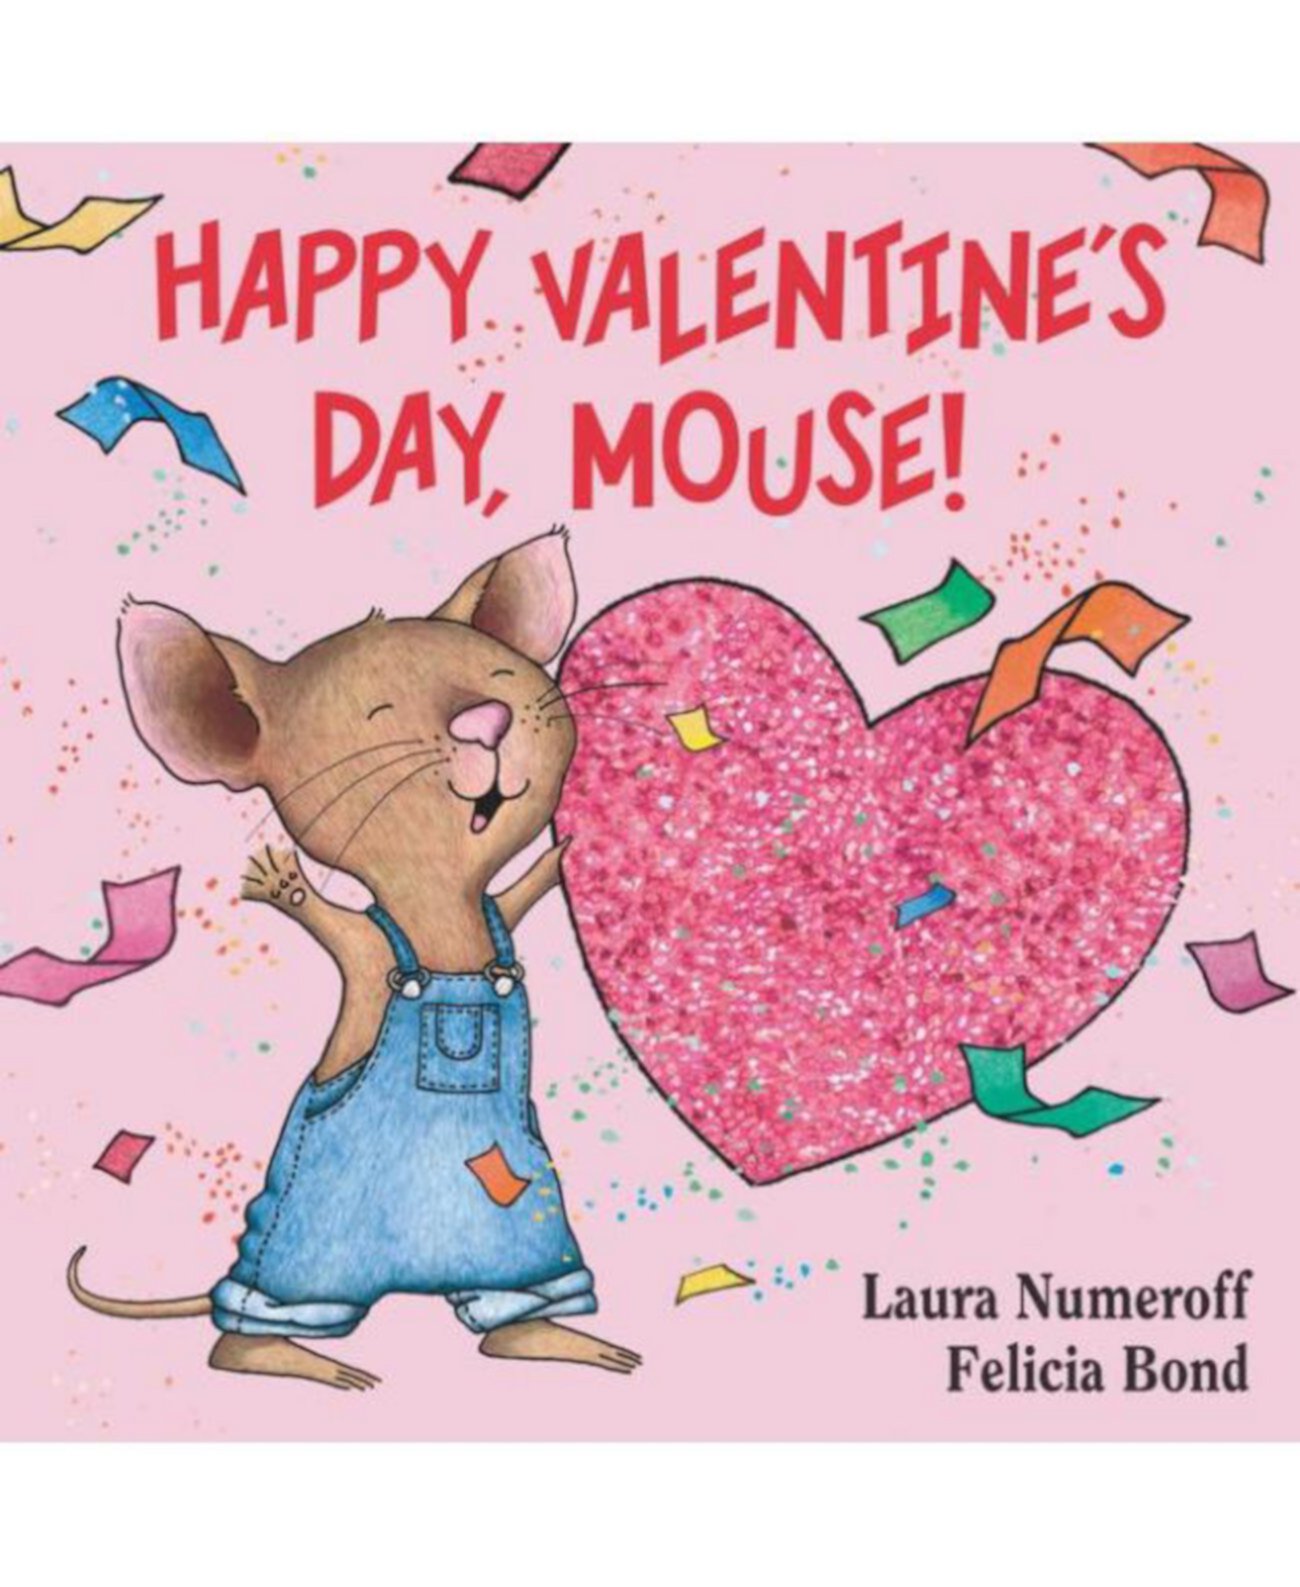 Happy Valentine's Day, Mouse If You Give. Series by Laura Numeroff Barnes & Noble